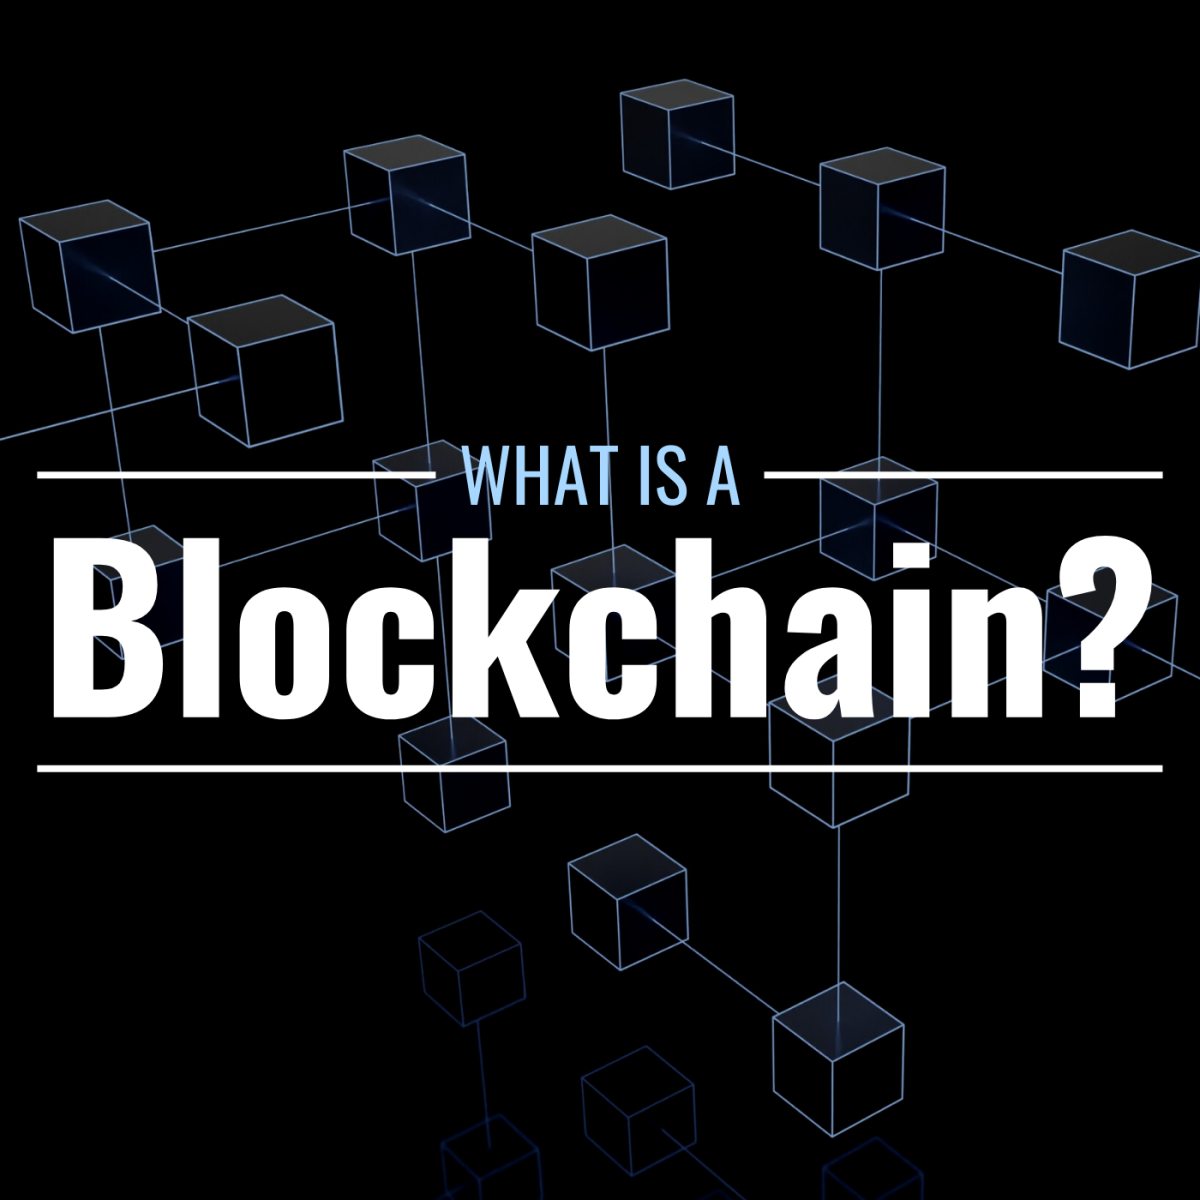 What Is a Blockchain and How Does It Work? Definition & Applications